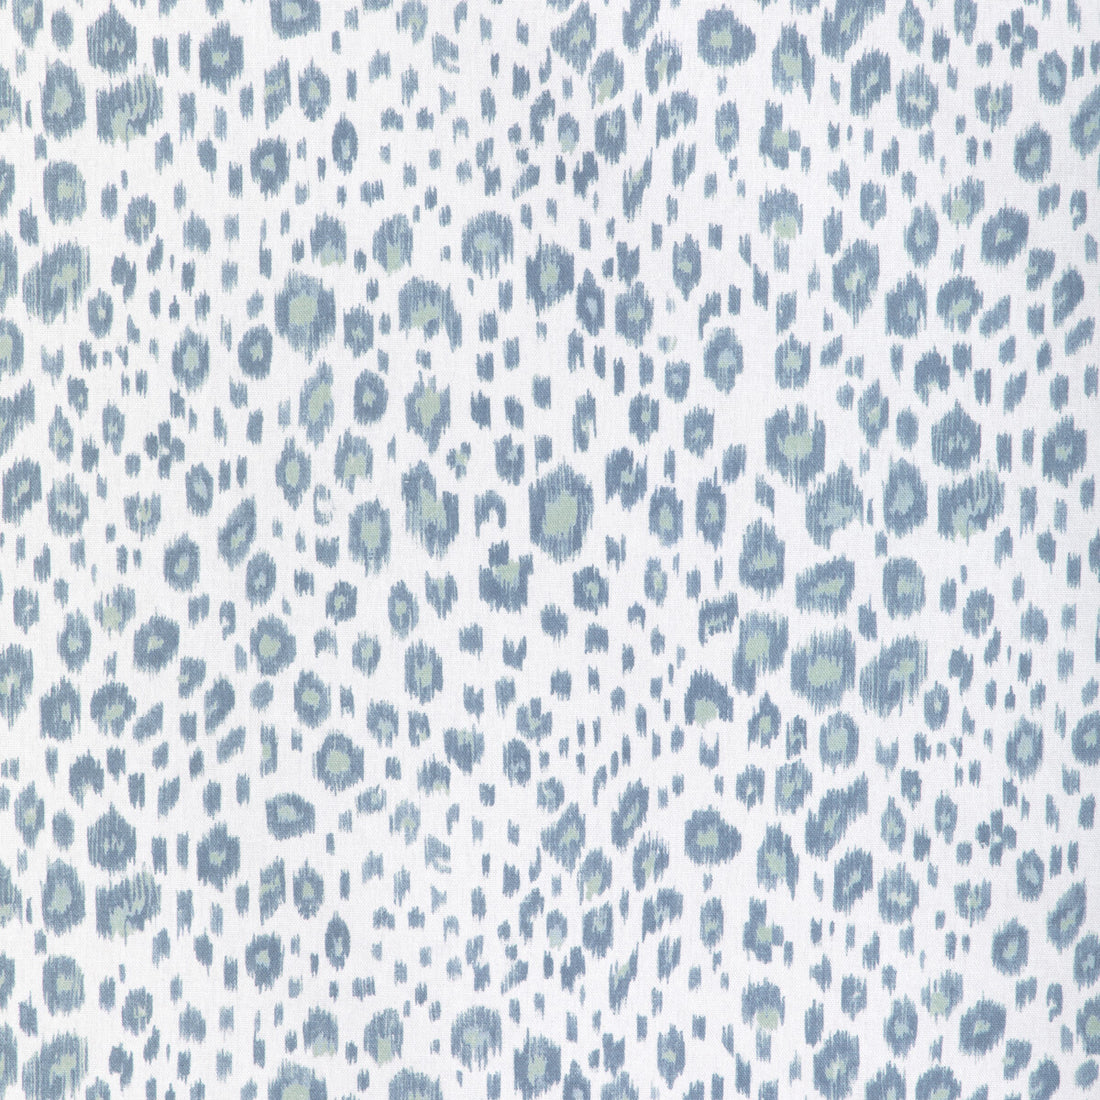 Leopardos fabric in sky color - pattern LEOPARDOS.15.0 - by Kravet Basics in the Small Scale Prints collection